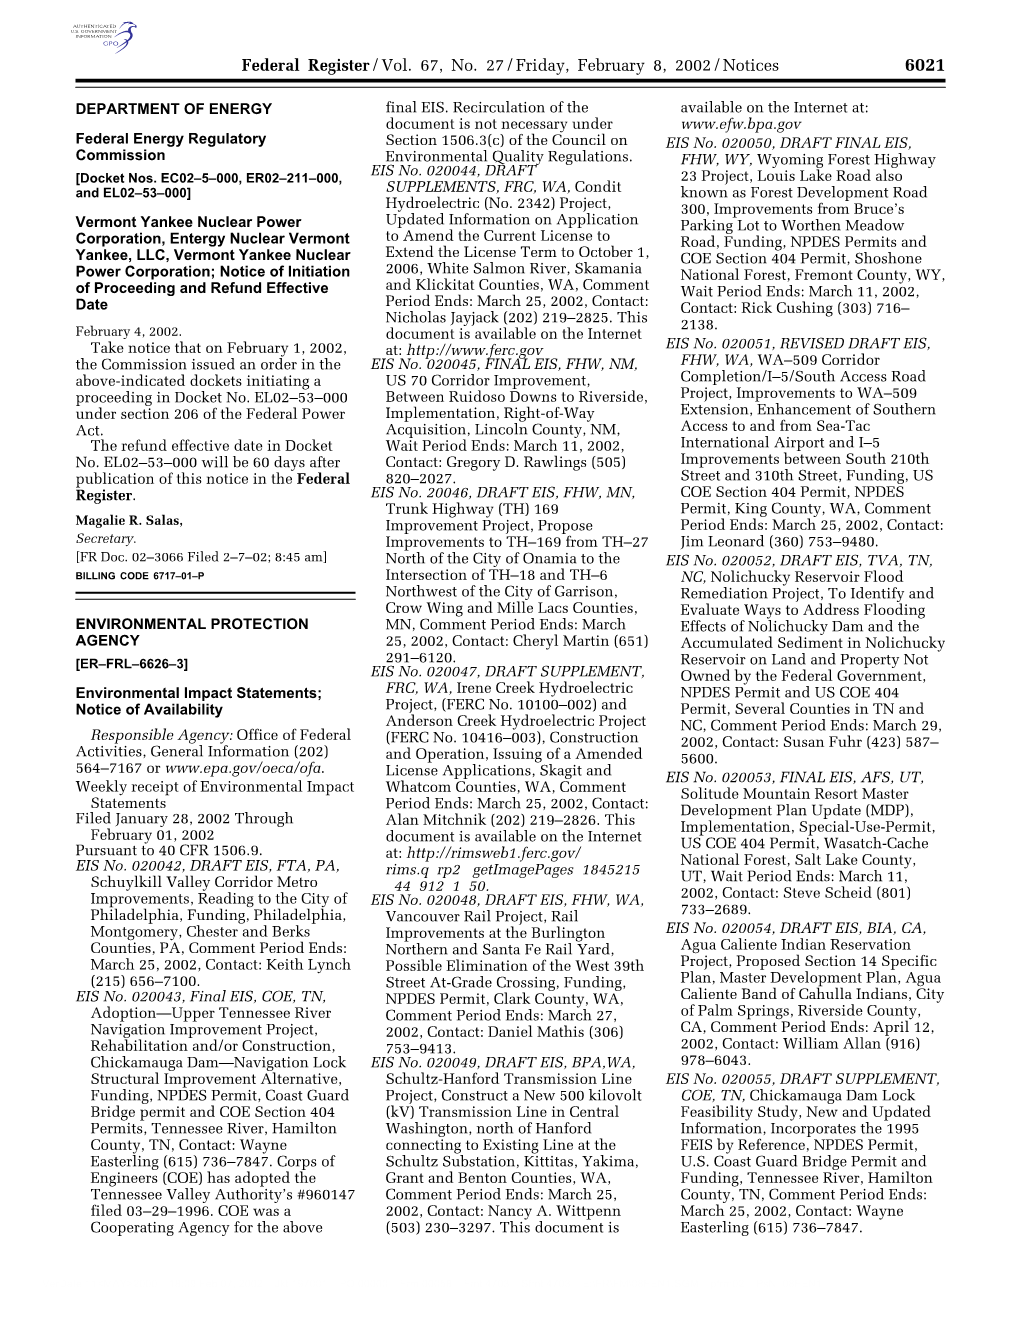 Federal Register/Vol. 67, No. 27/Friday, February 8, 2002/Notices